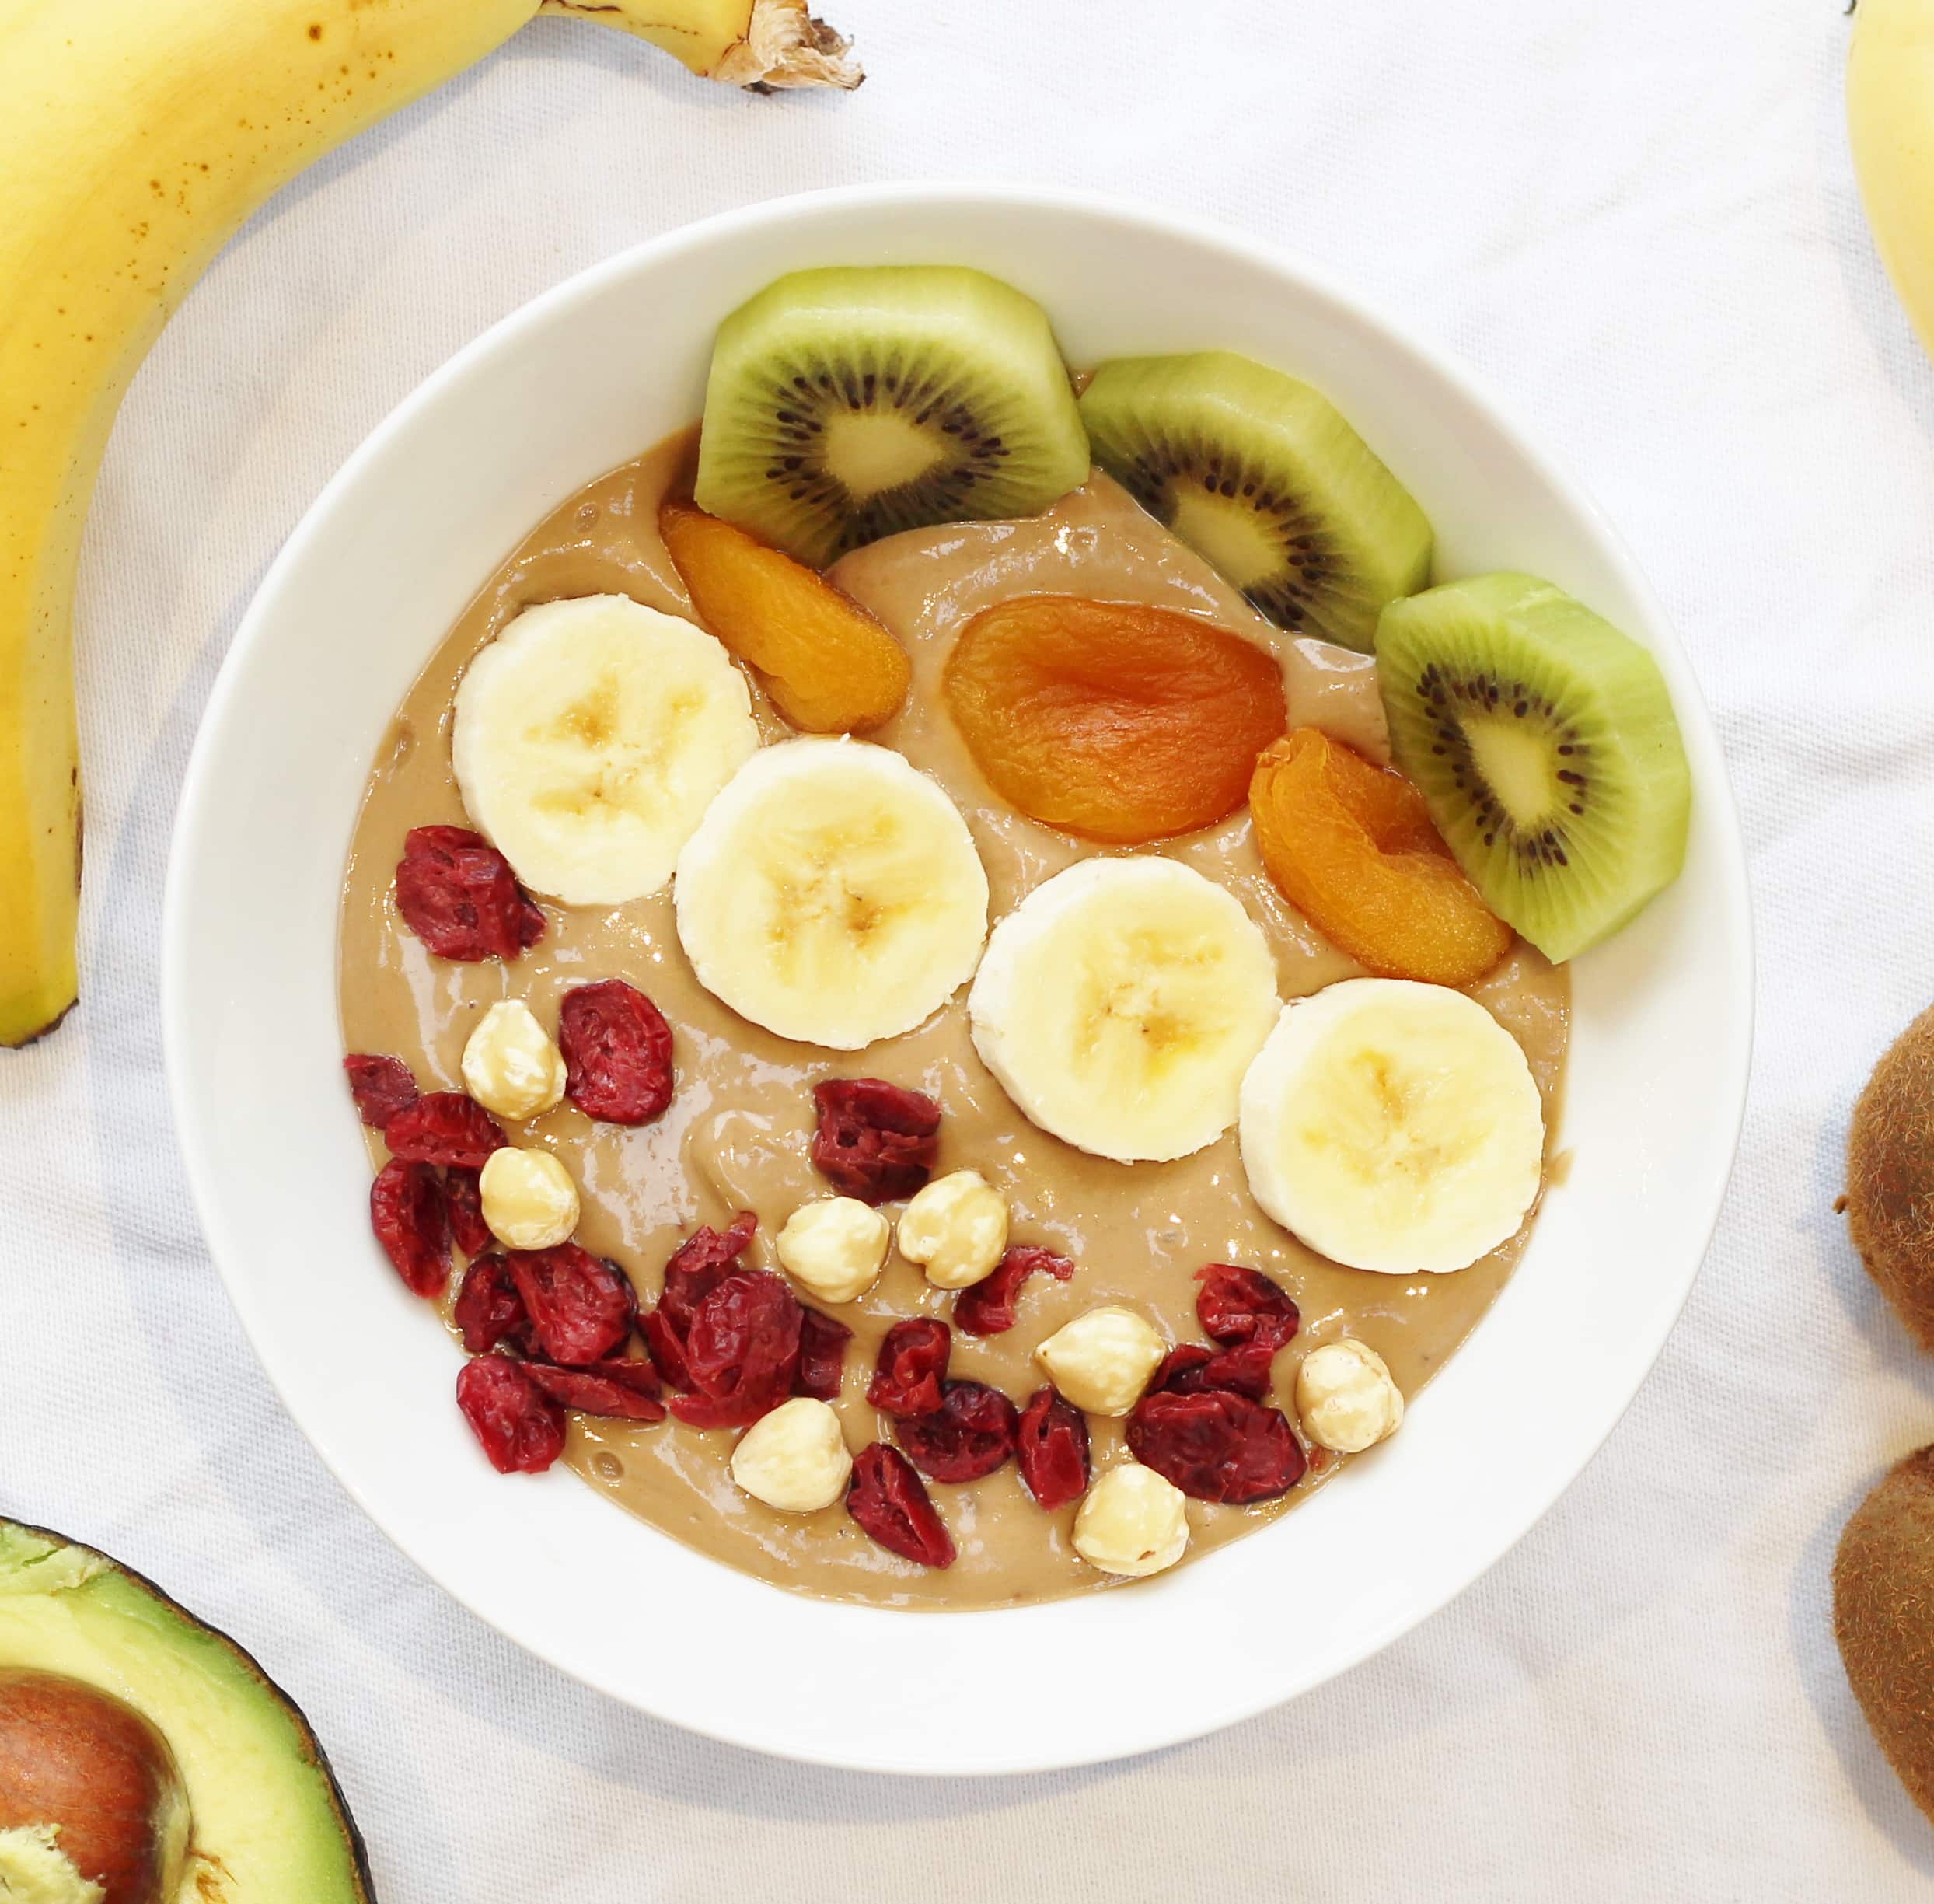 Healthy Nutella smoothie bowl with banana and avocado topped with banana, kiwi fruit, dried apricots, cranberries and hazelnuts